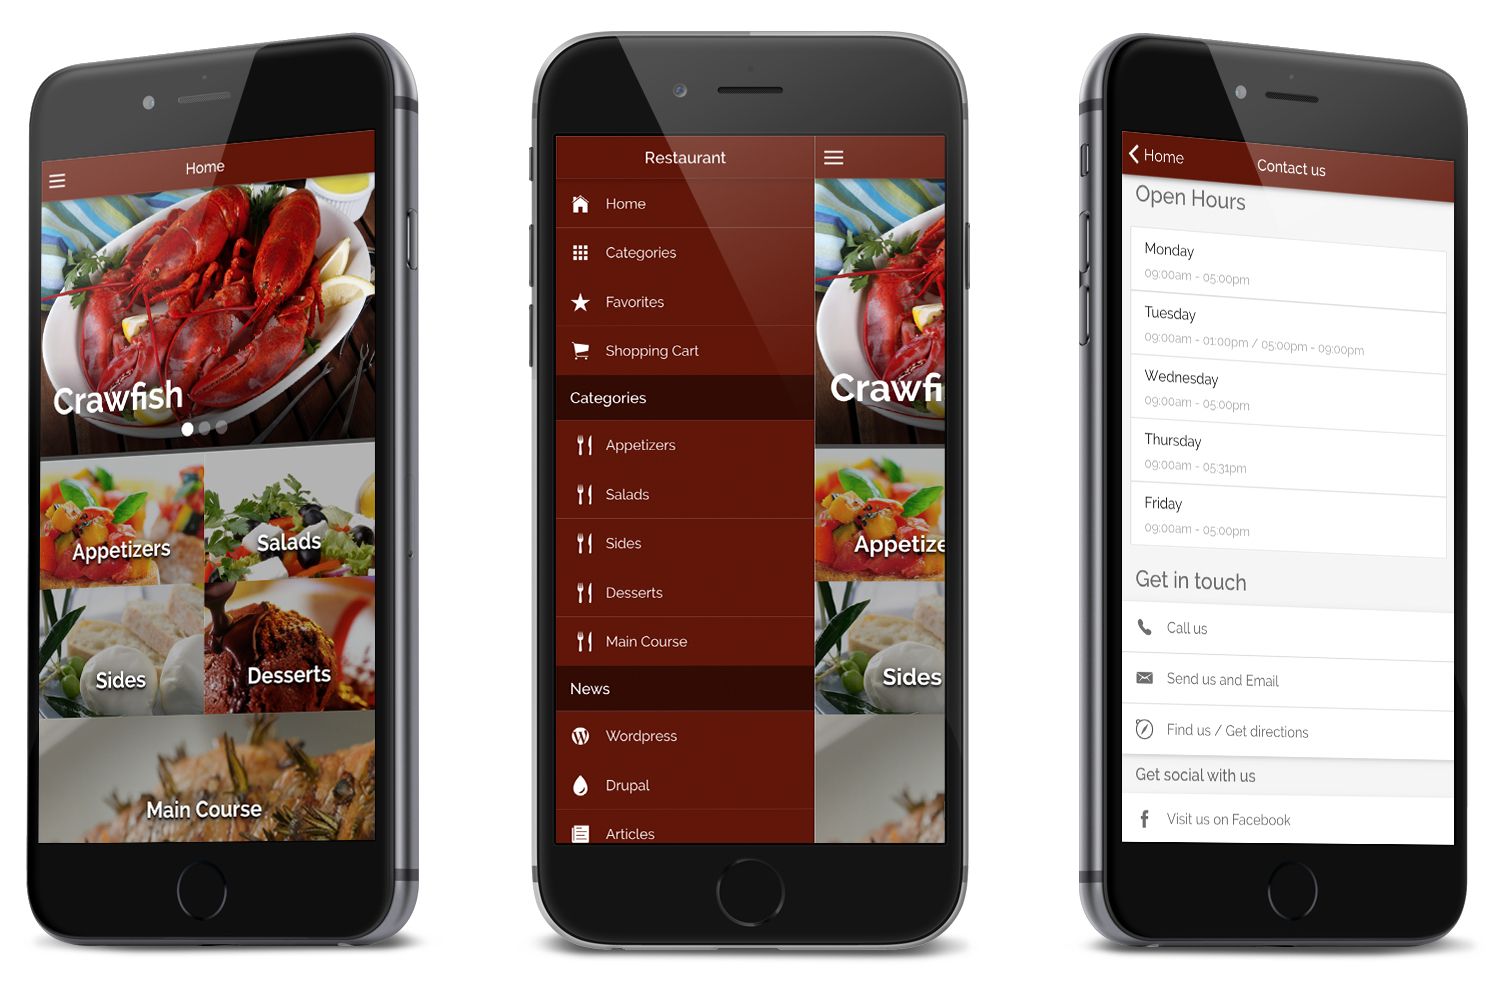 Restaurant Ionic Classy- Full Application with Firebase backend - 5